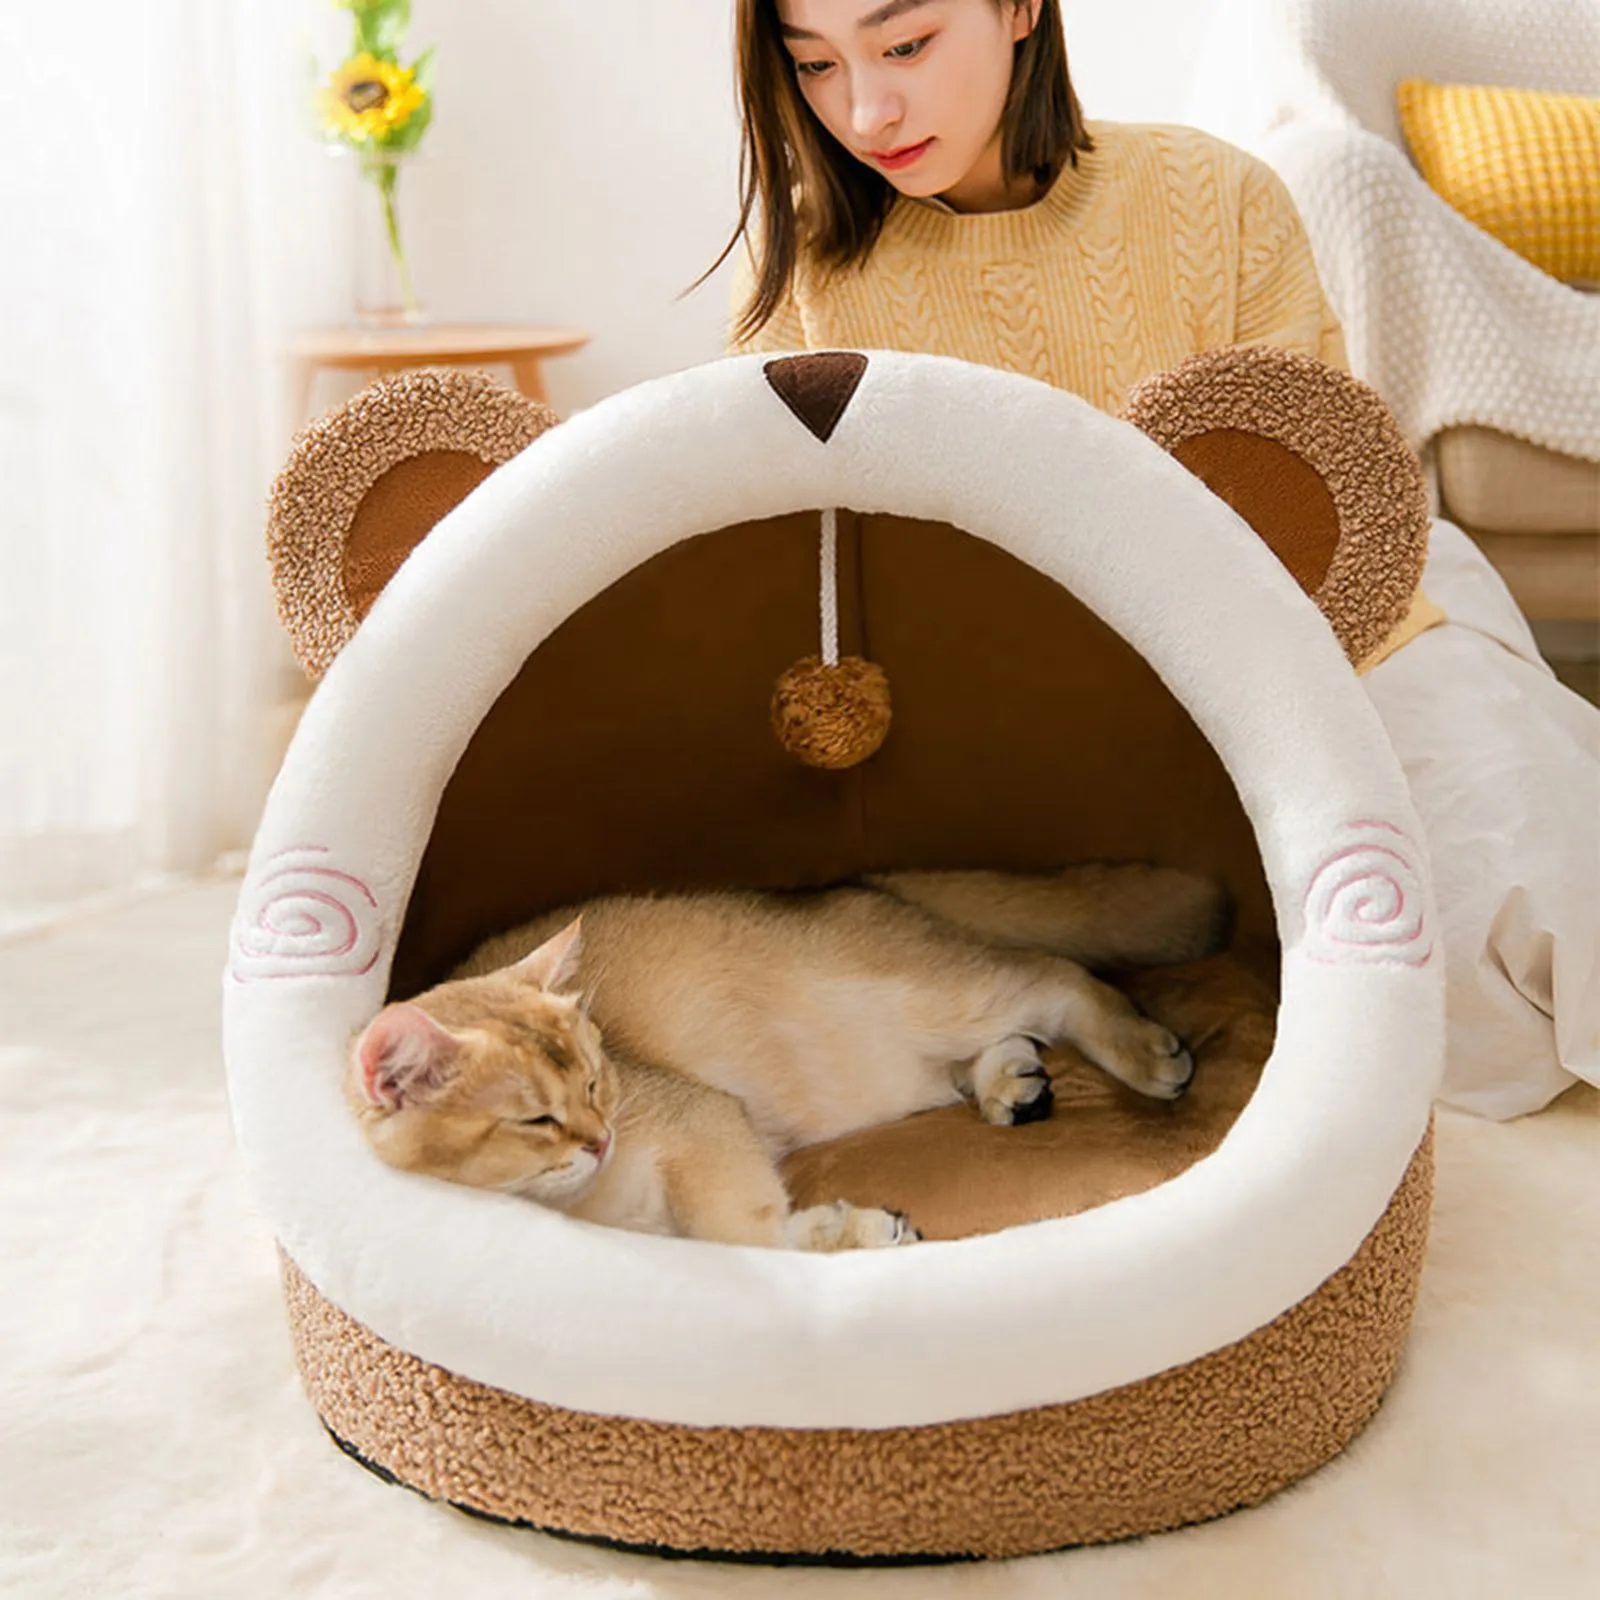 Warm Indoor Cozy Bed Pet Cat Dog Bed House Cave Pets Puppy Kitten Nest Sleeping Bed with Hair Ball Toys for Cat Dog Playing